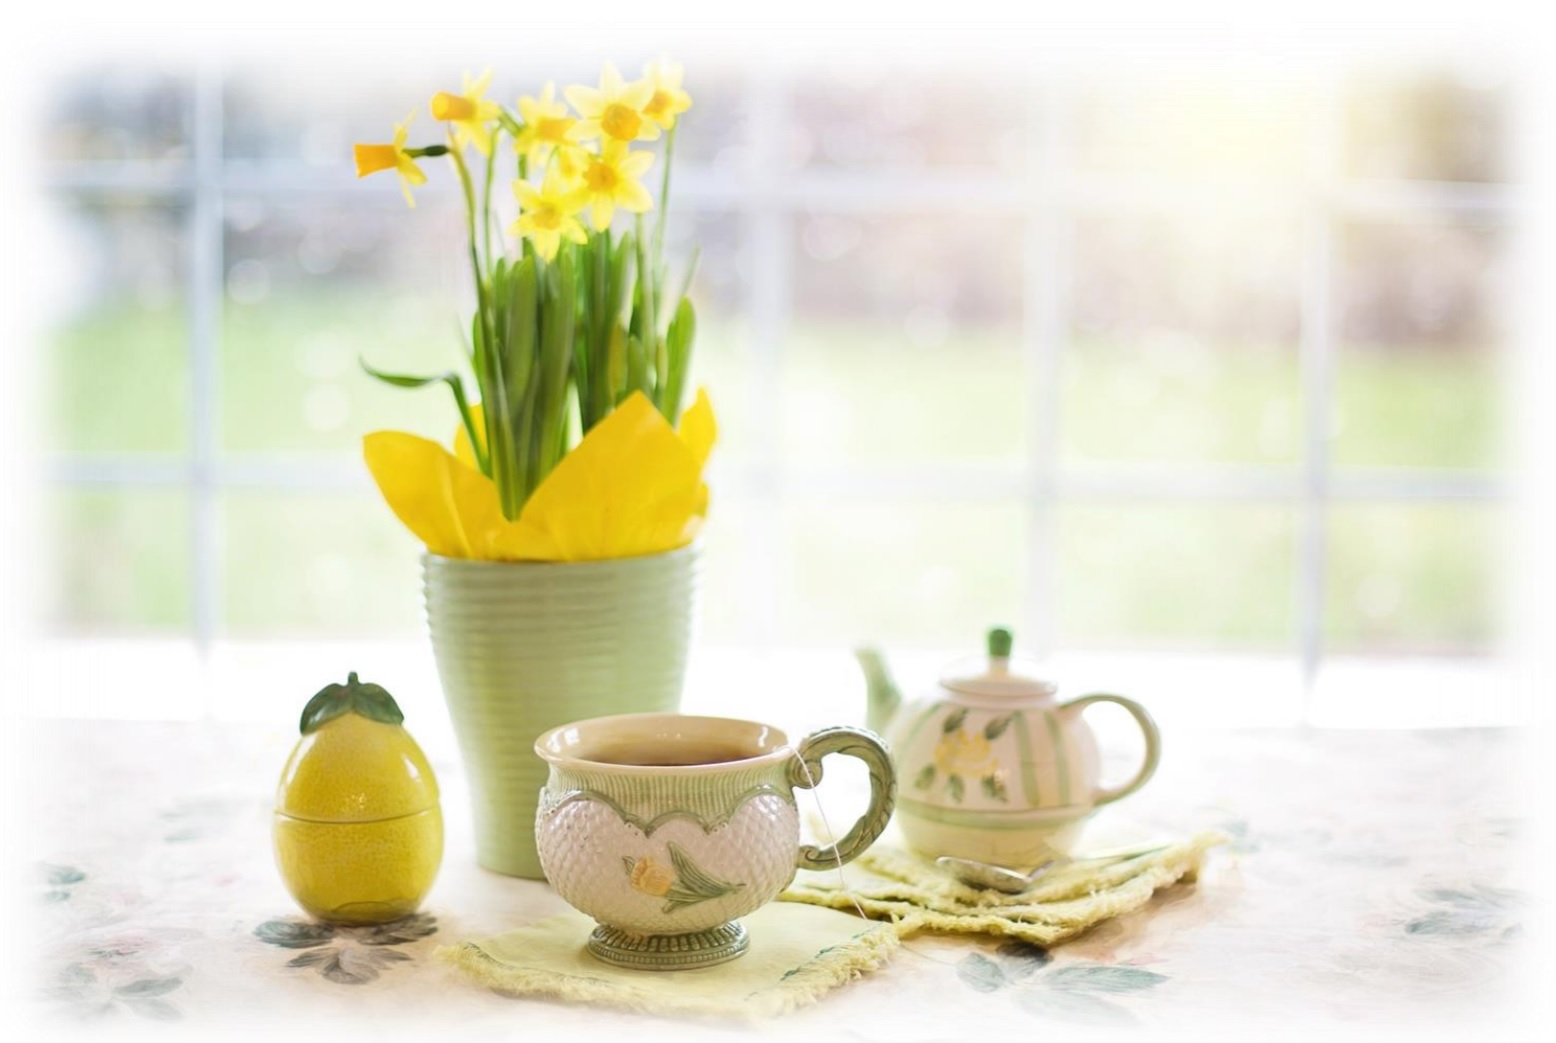 Late Winter & Spring Seasonal syrup recipes for tea and coffee 